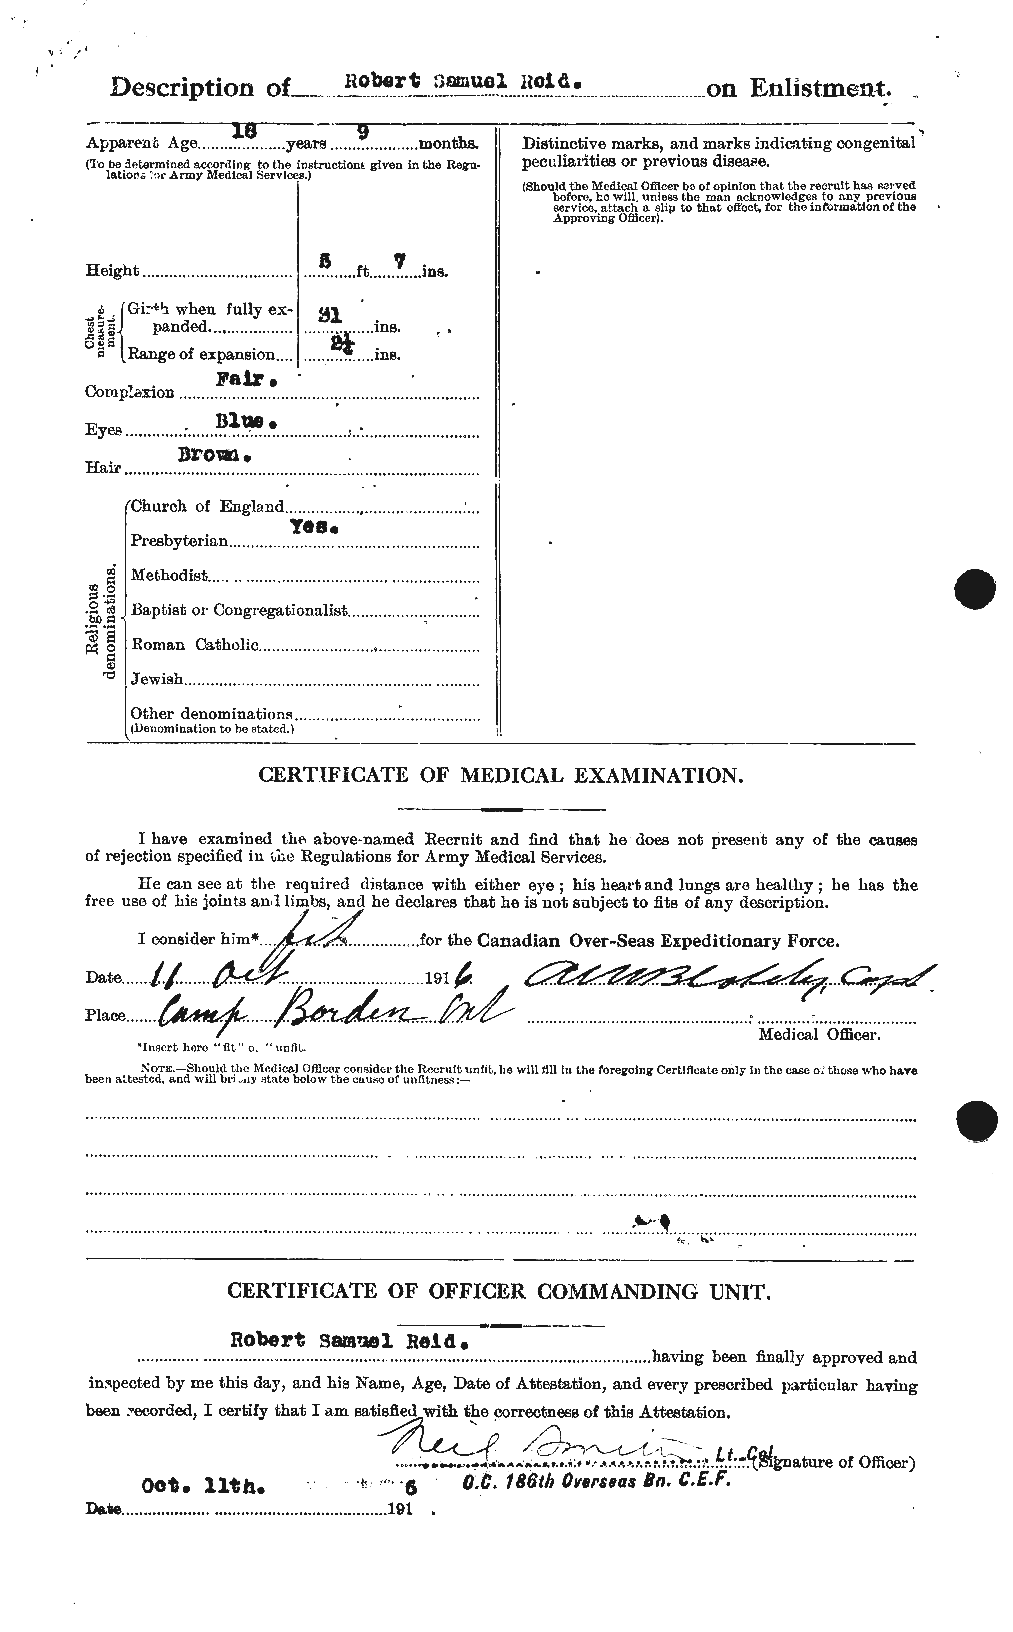 Personnel Records of the First World War - CEF 601921b